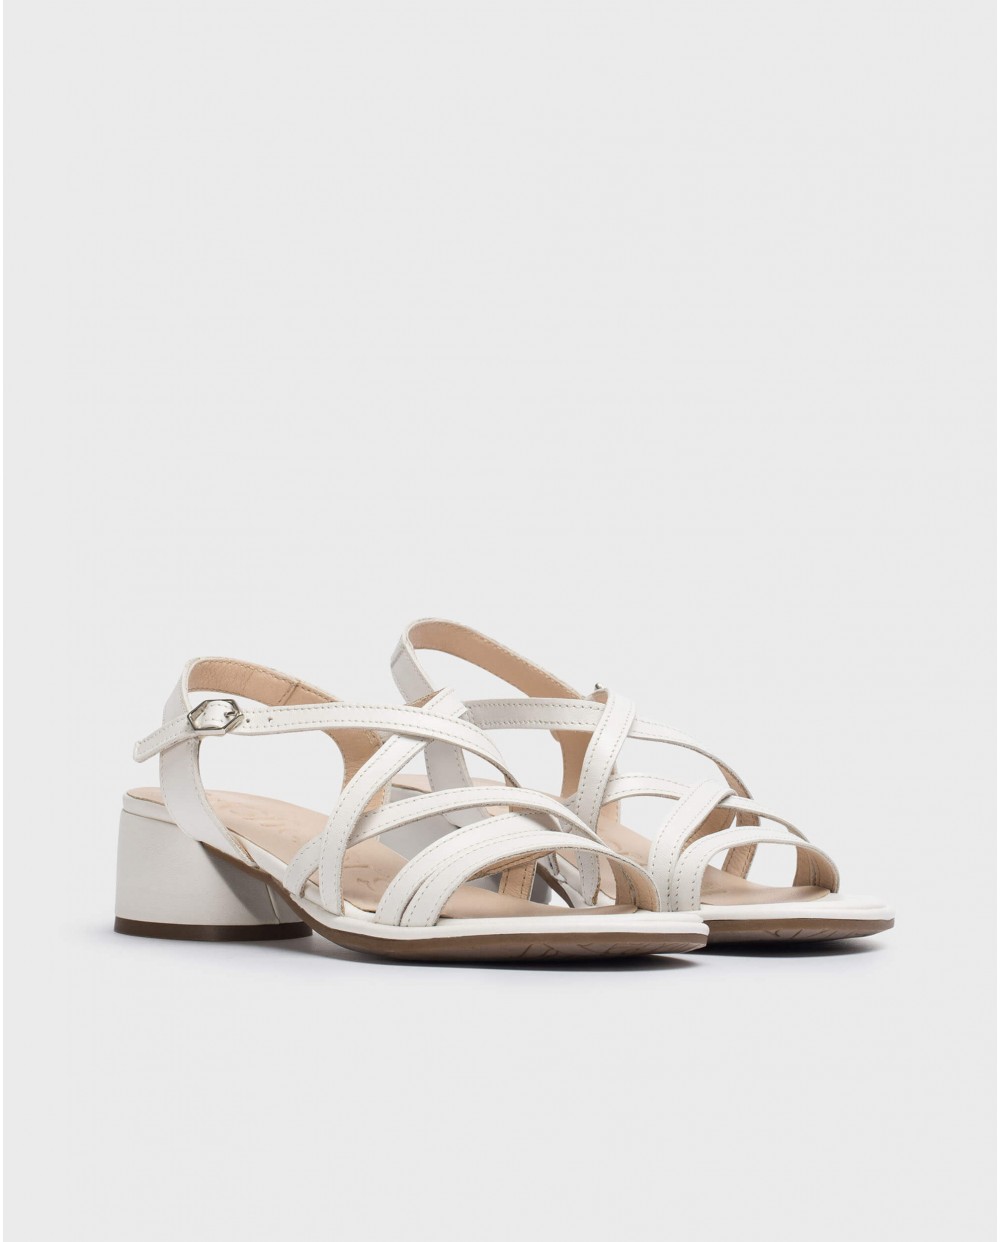 Wonders-Heels-Flat sandal with leather straps